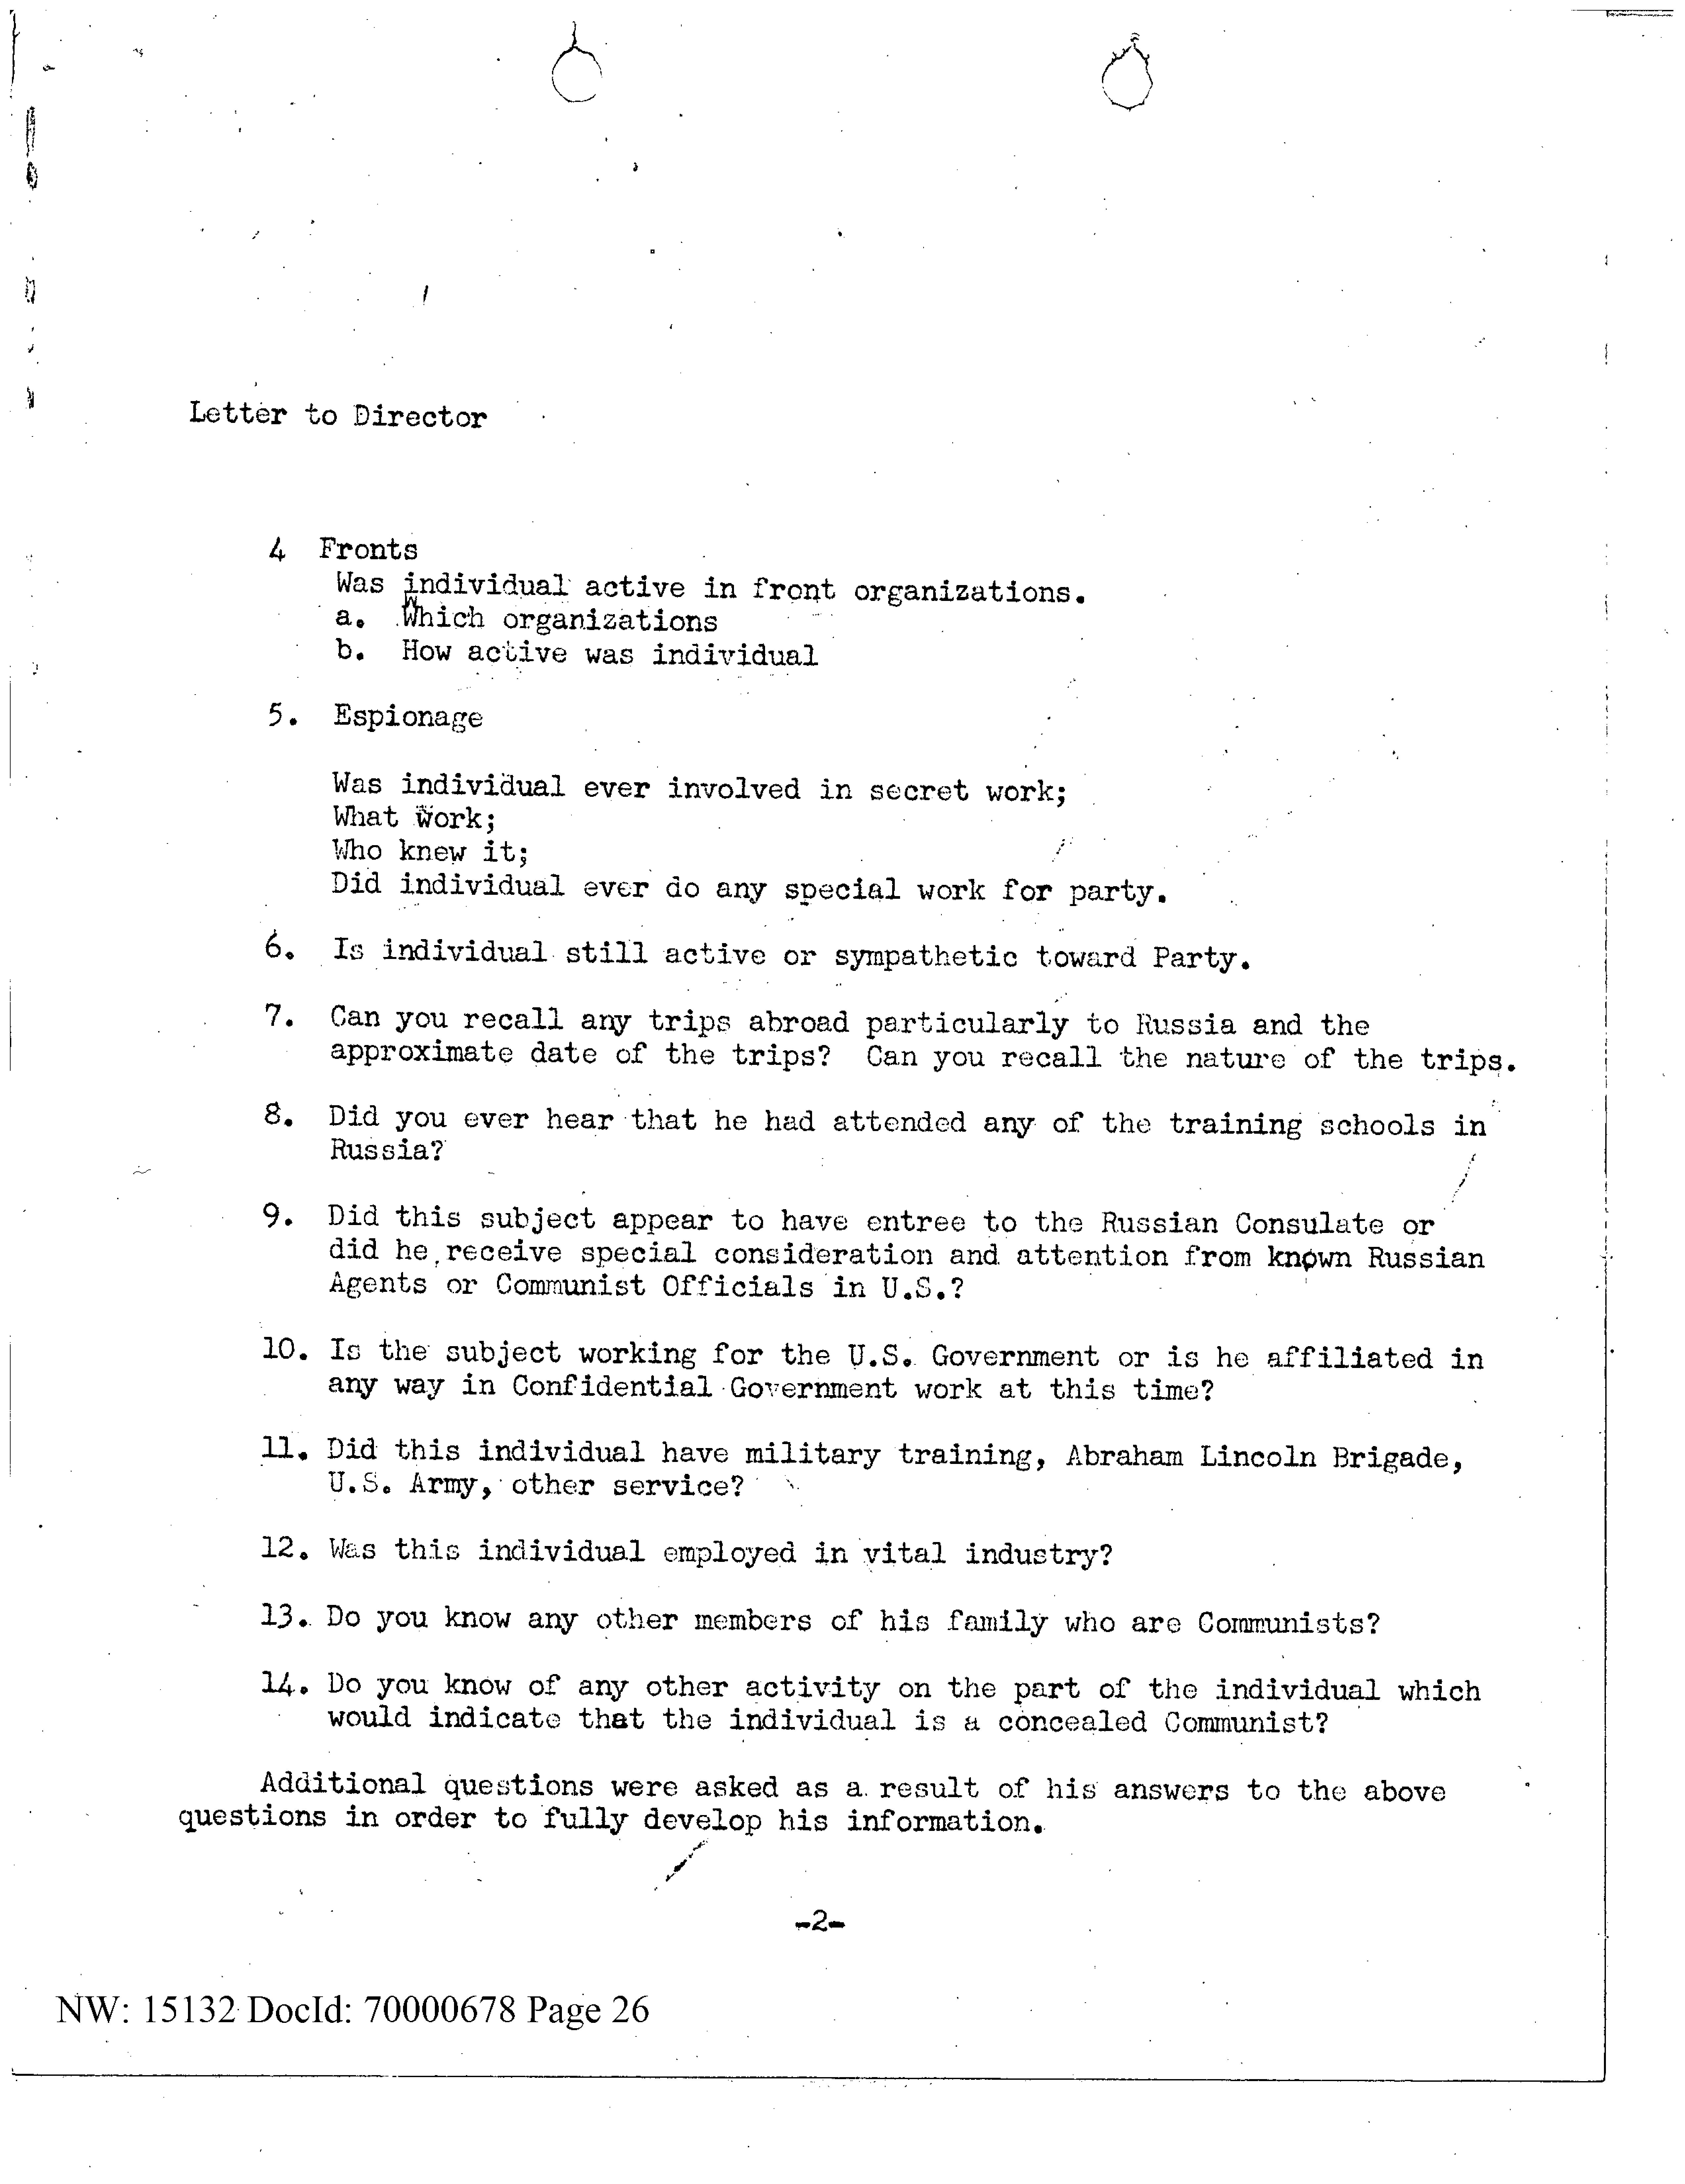 Questions FBI used to determine communist sympathies, from Royle's FBI file